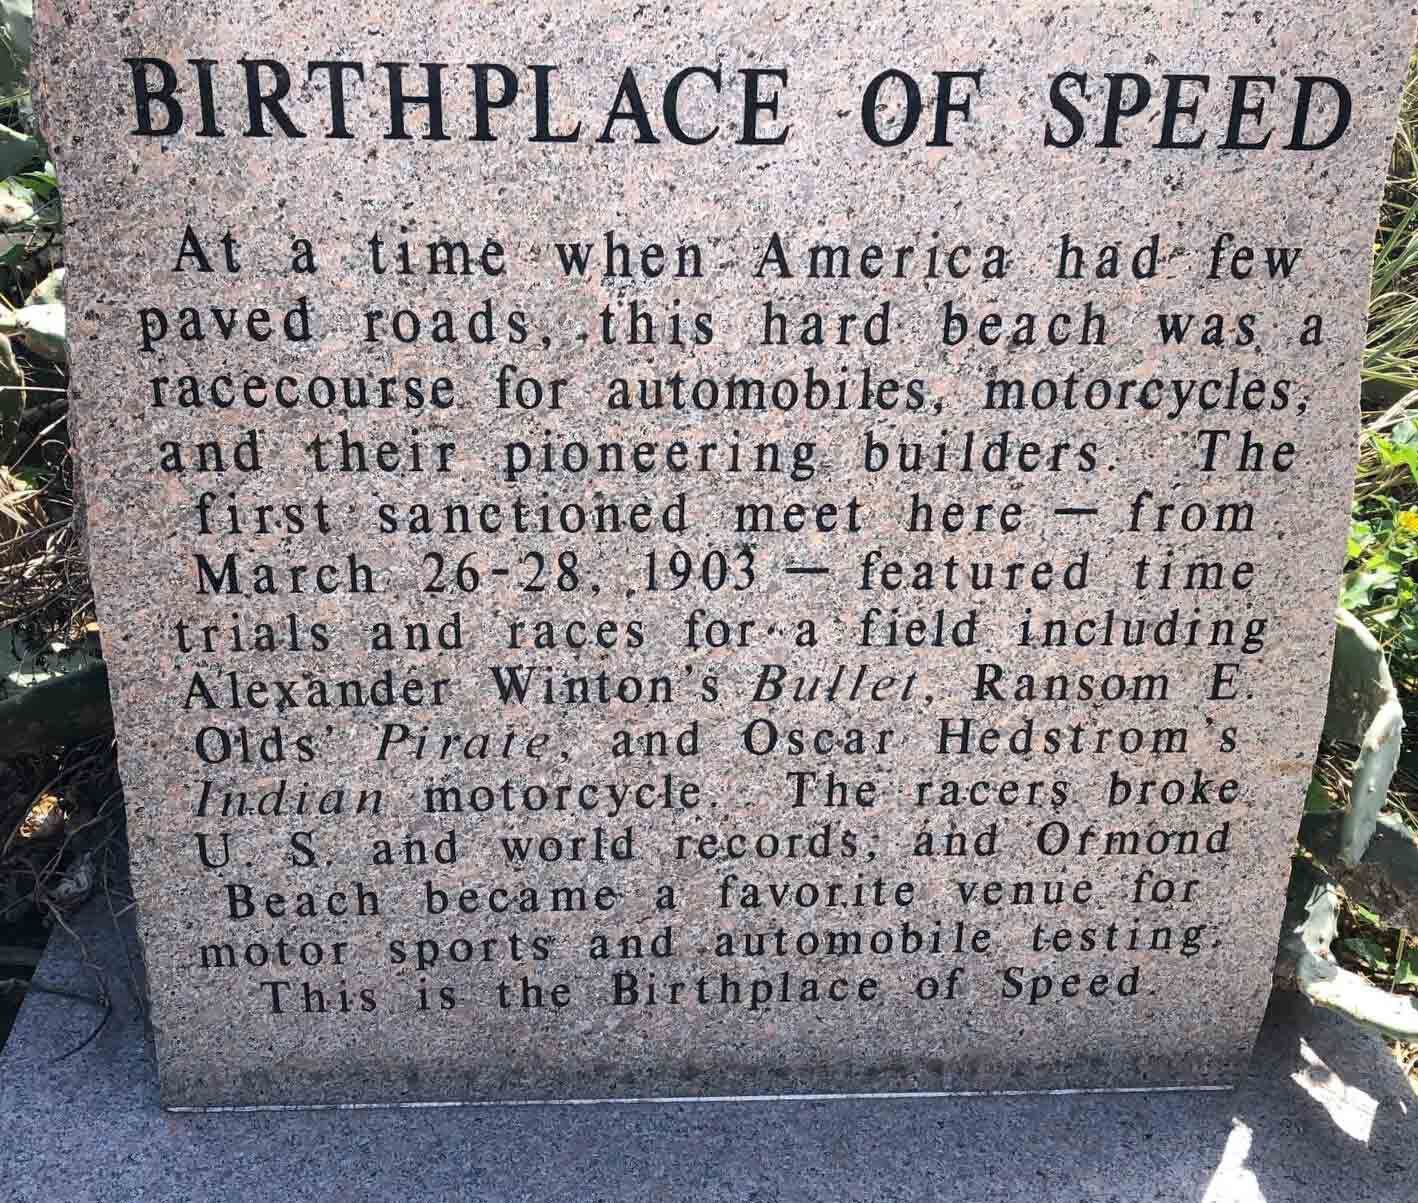 Just north of Daytona is the Birthplace of Speed pocket park, a fascinating site with memorials to the history that was made on this stretch of sand over a century ago.